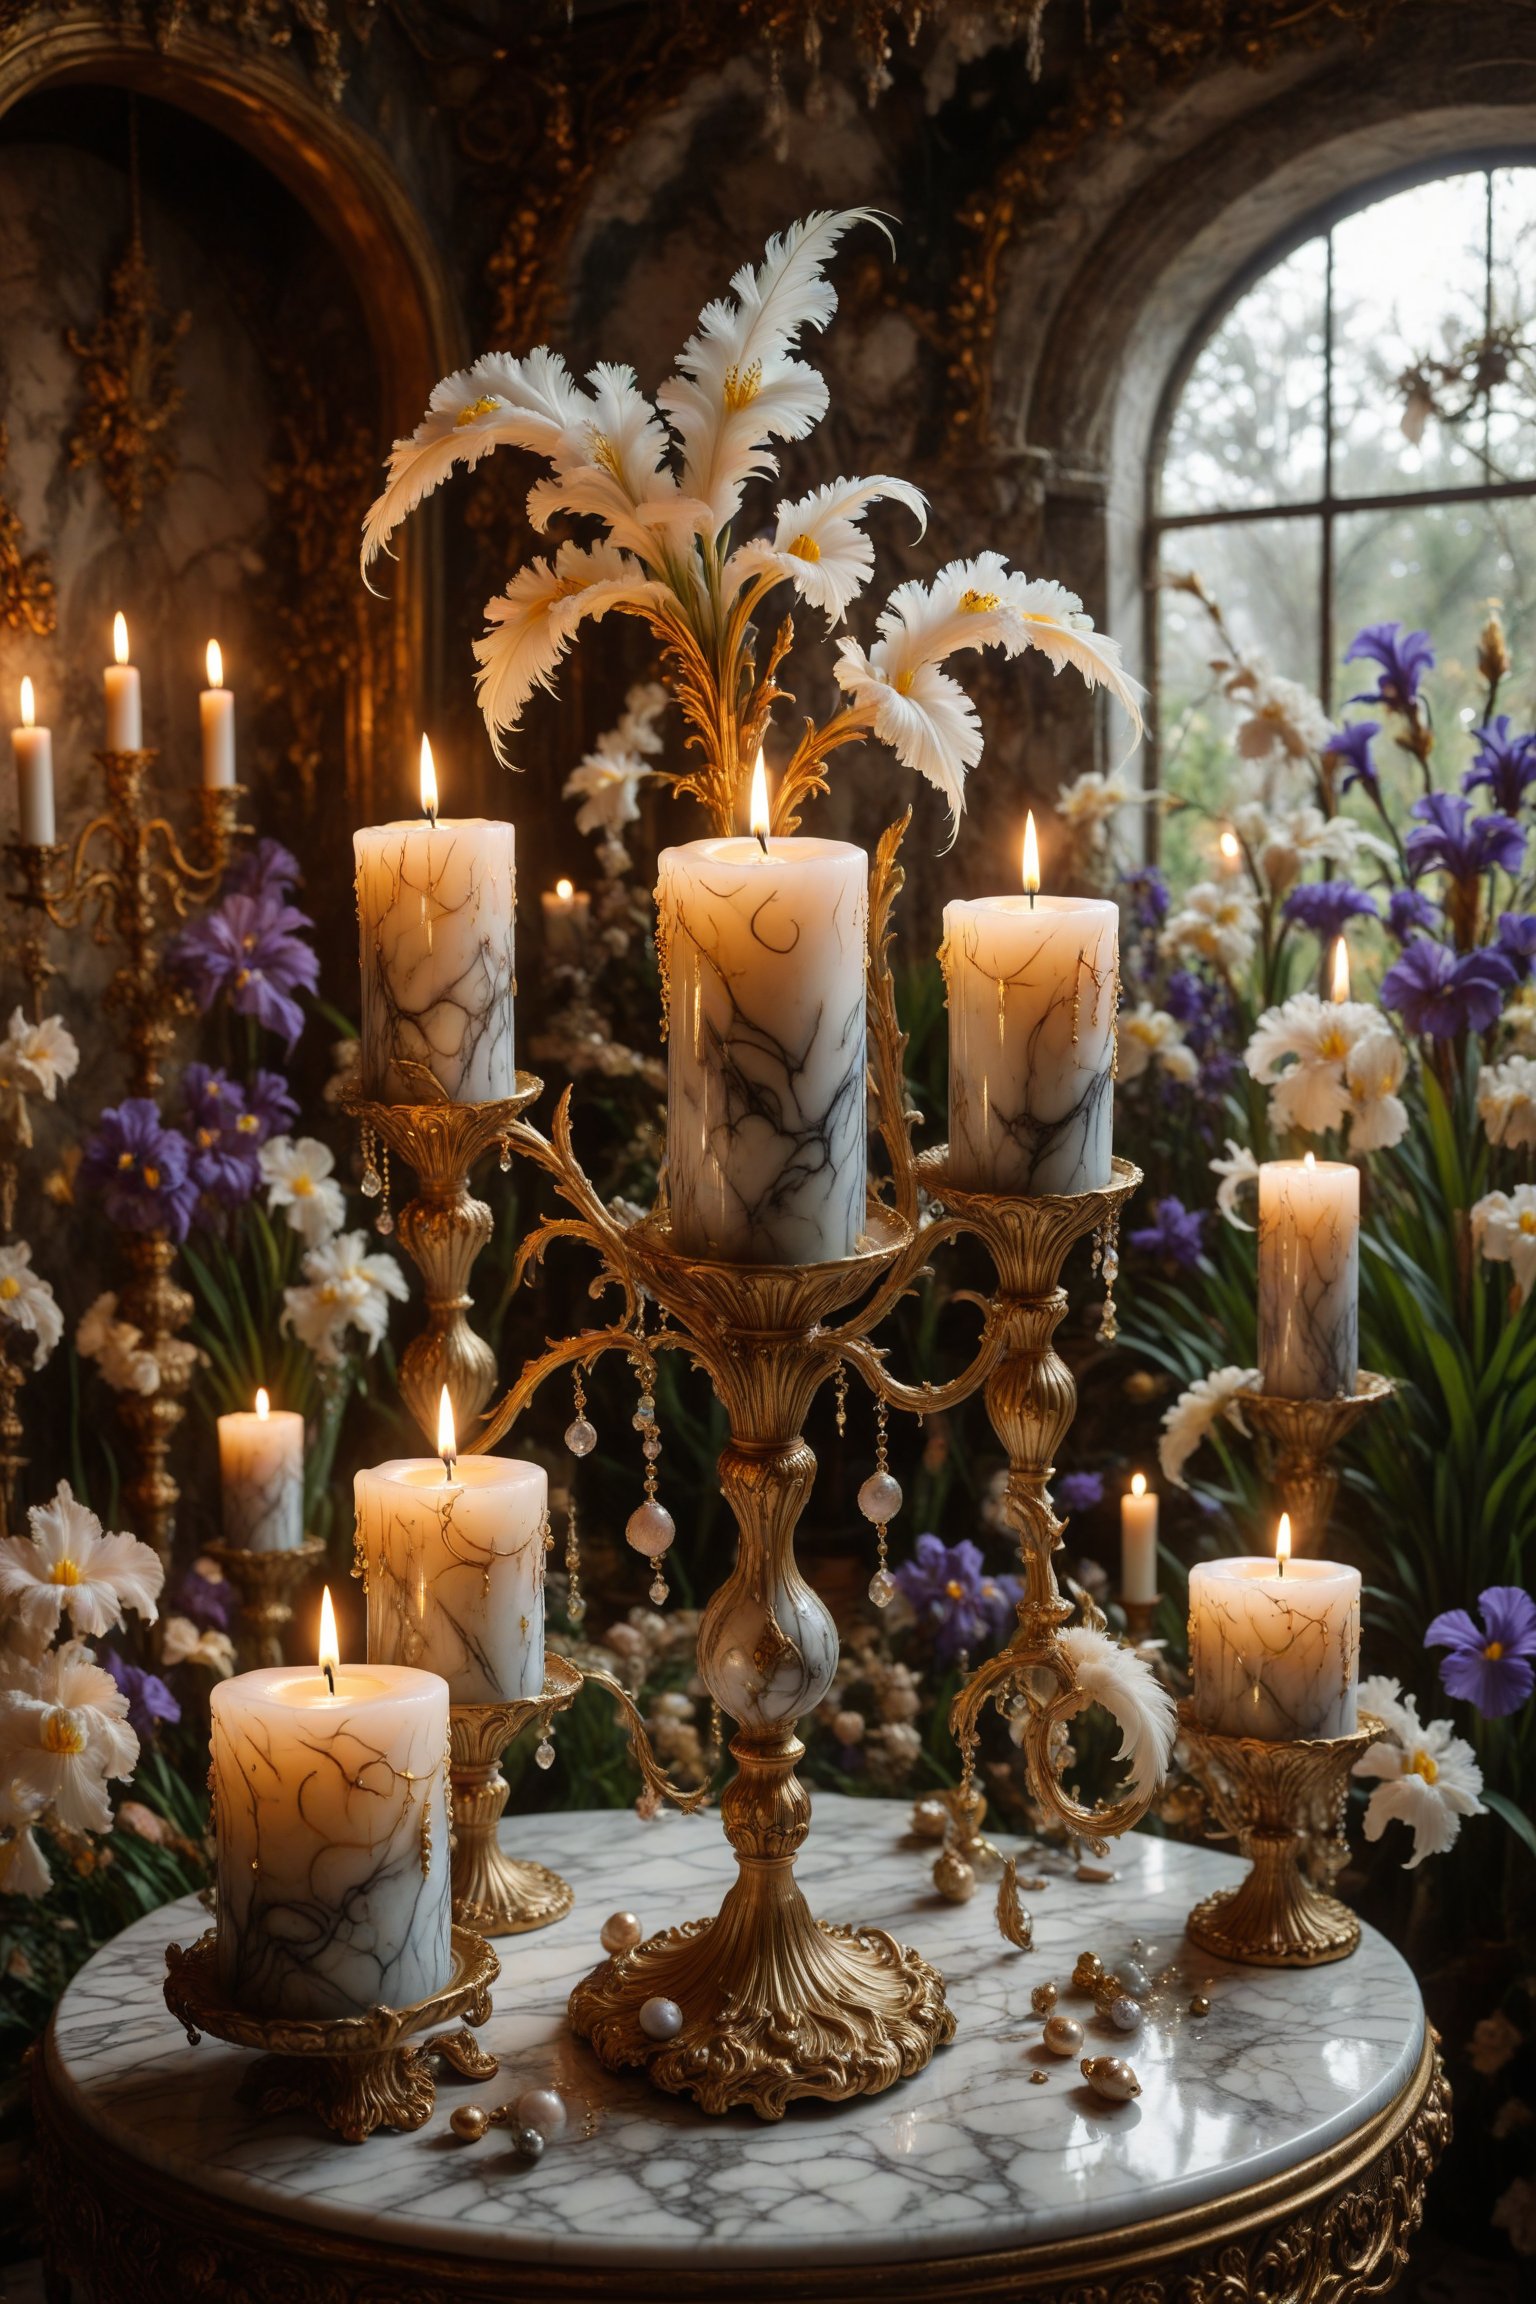 A candle with marble texture and interesting, surreal organic curves, in a surreal garden with golden candelabras and blooming irises. Inlaid decorative gold accents, feathers, diamonds, and iridescent bubbles.